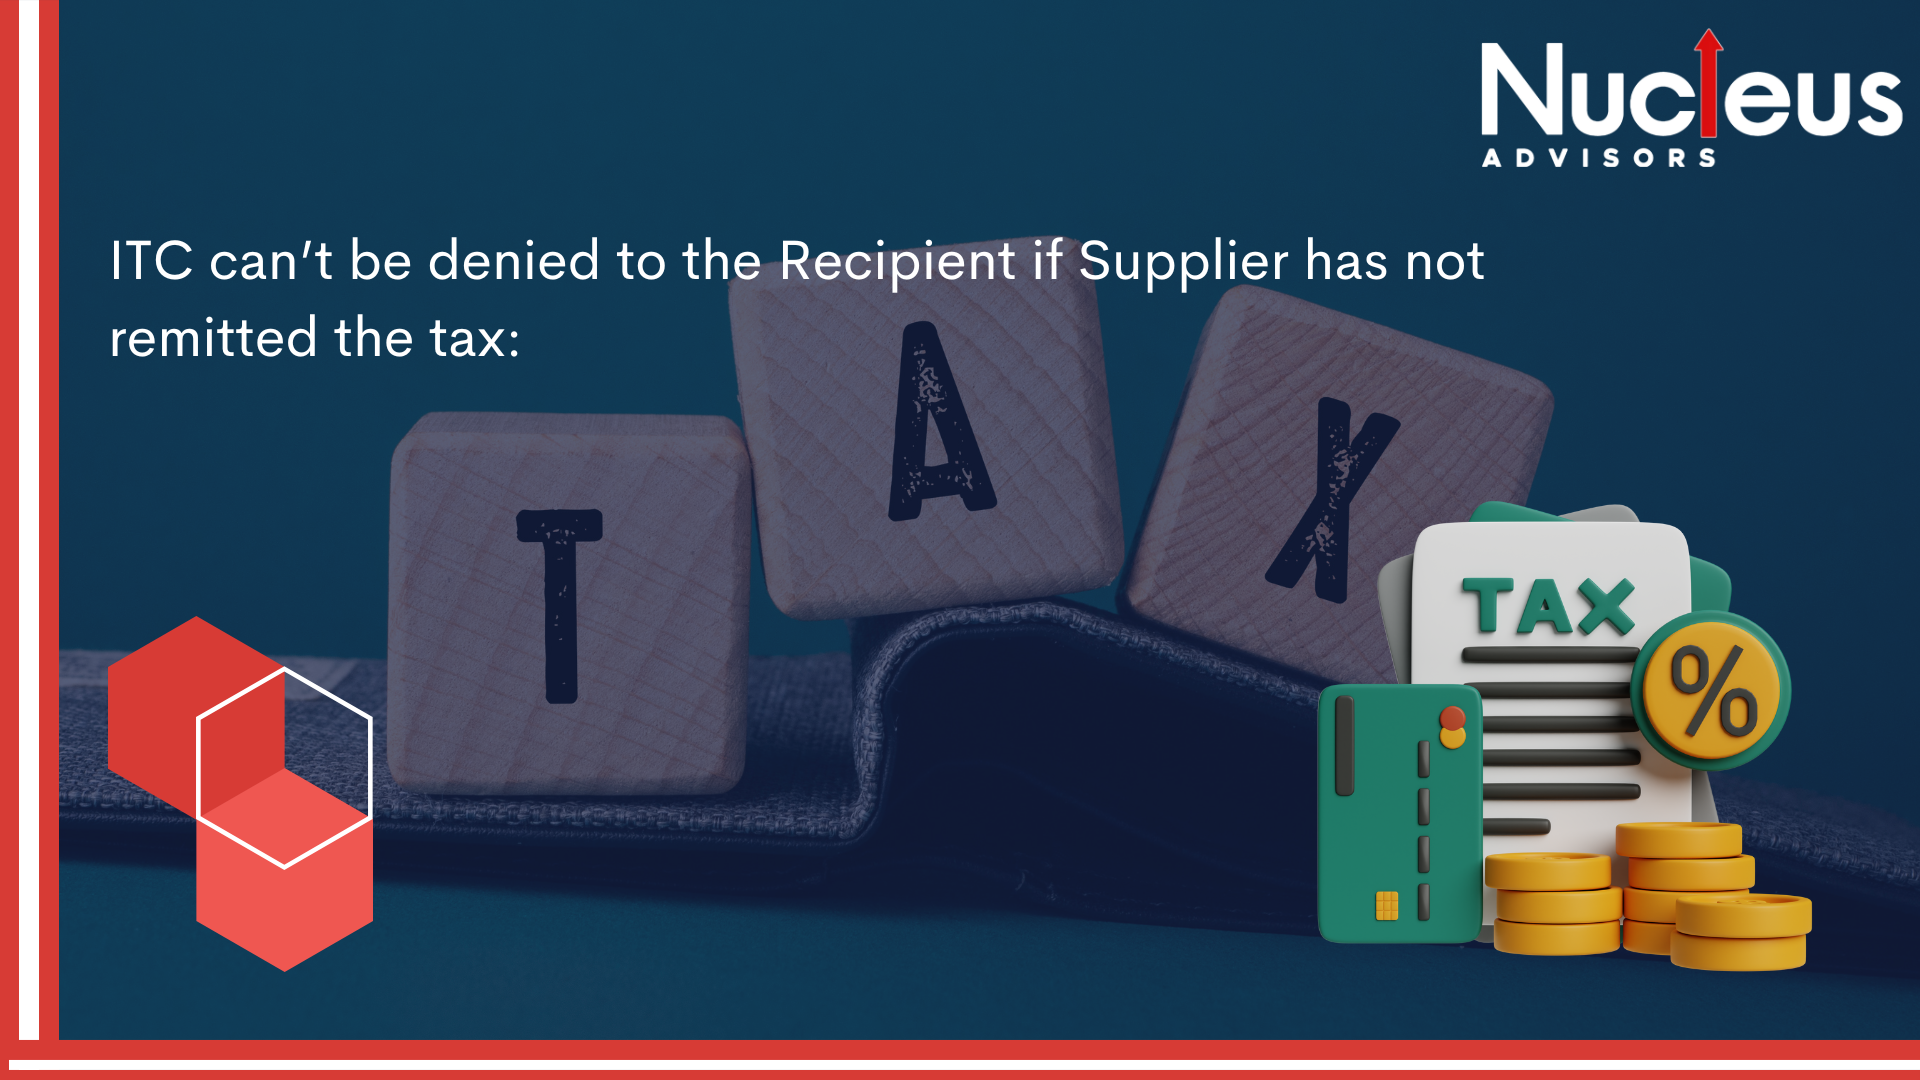 ITC can’t be denied to the Recipient if Supplier has not remitted the tax: